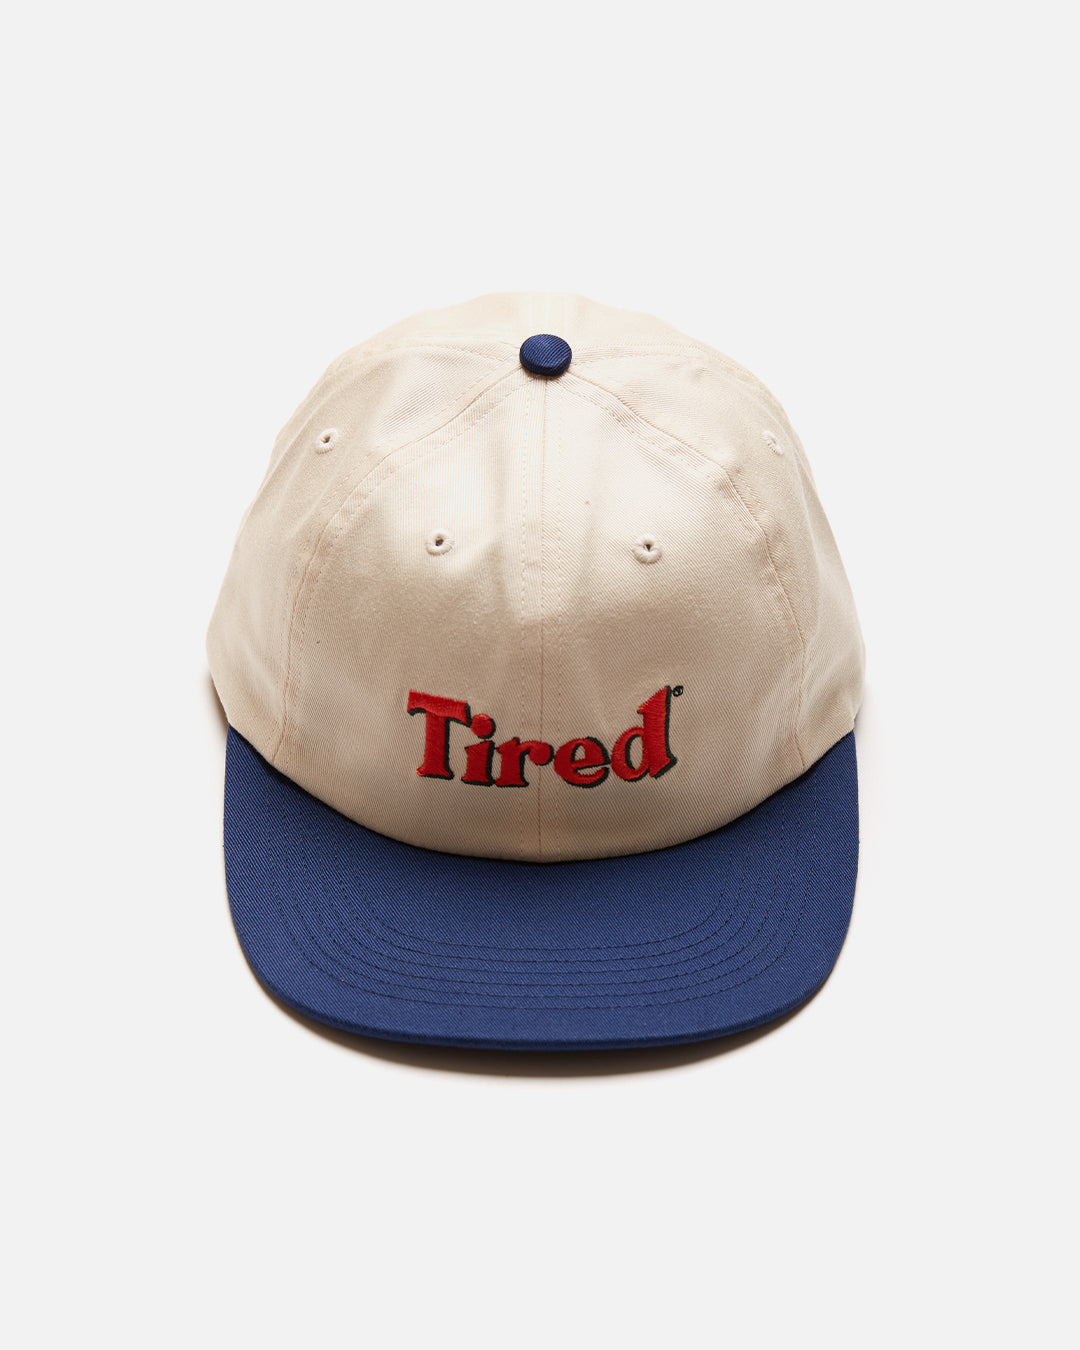 Blues Two Cream Tone in Logo Dark Store Cap | Tired and Blue